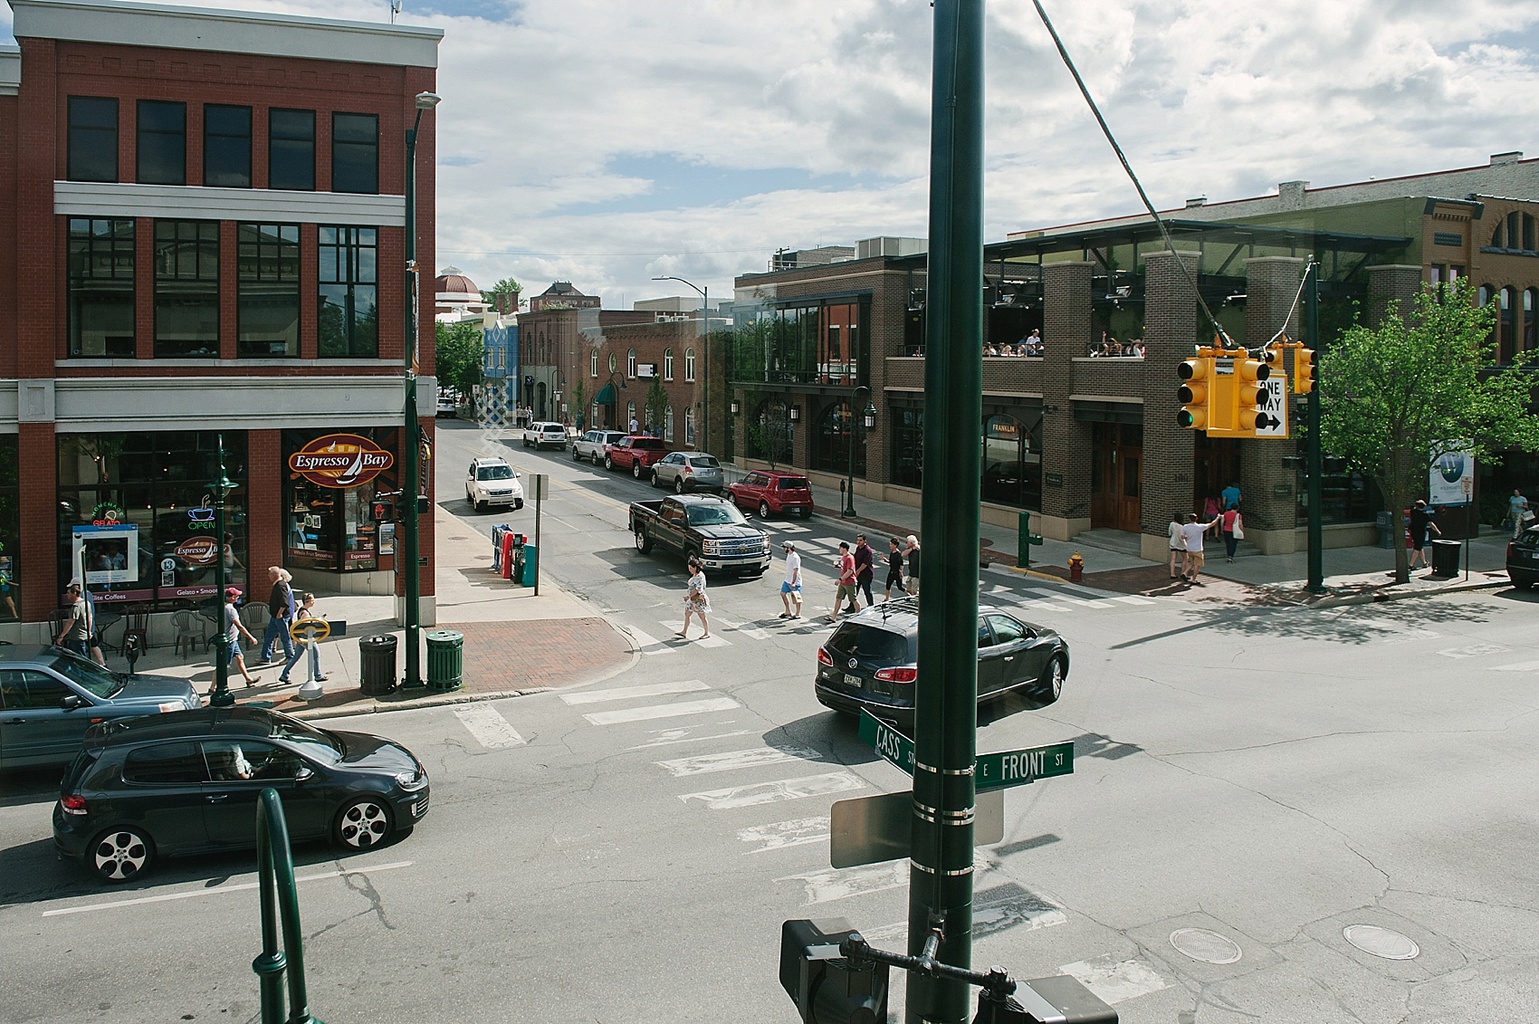 Traverse City Wedding Venues: The view from the Corner Loft on Front Street in downtown Traverse City (wedding venue photos)